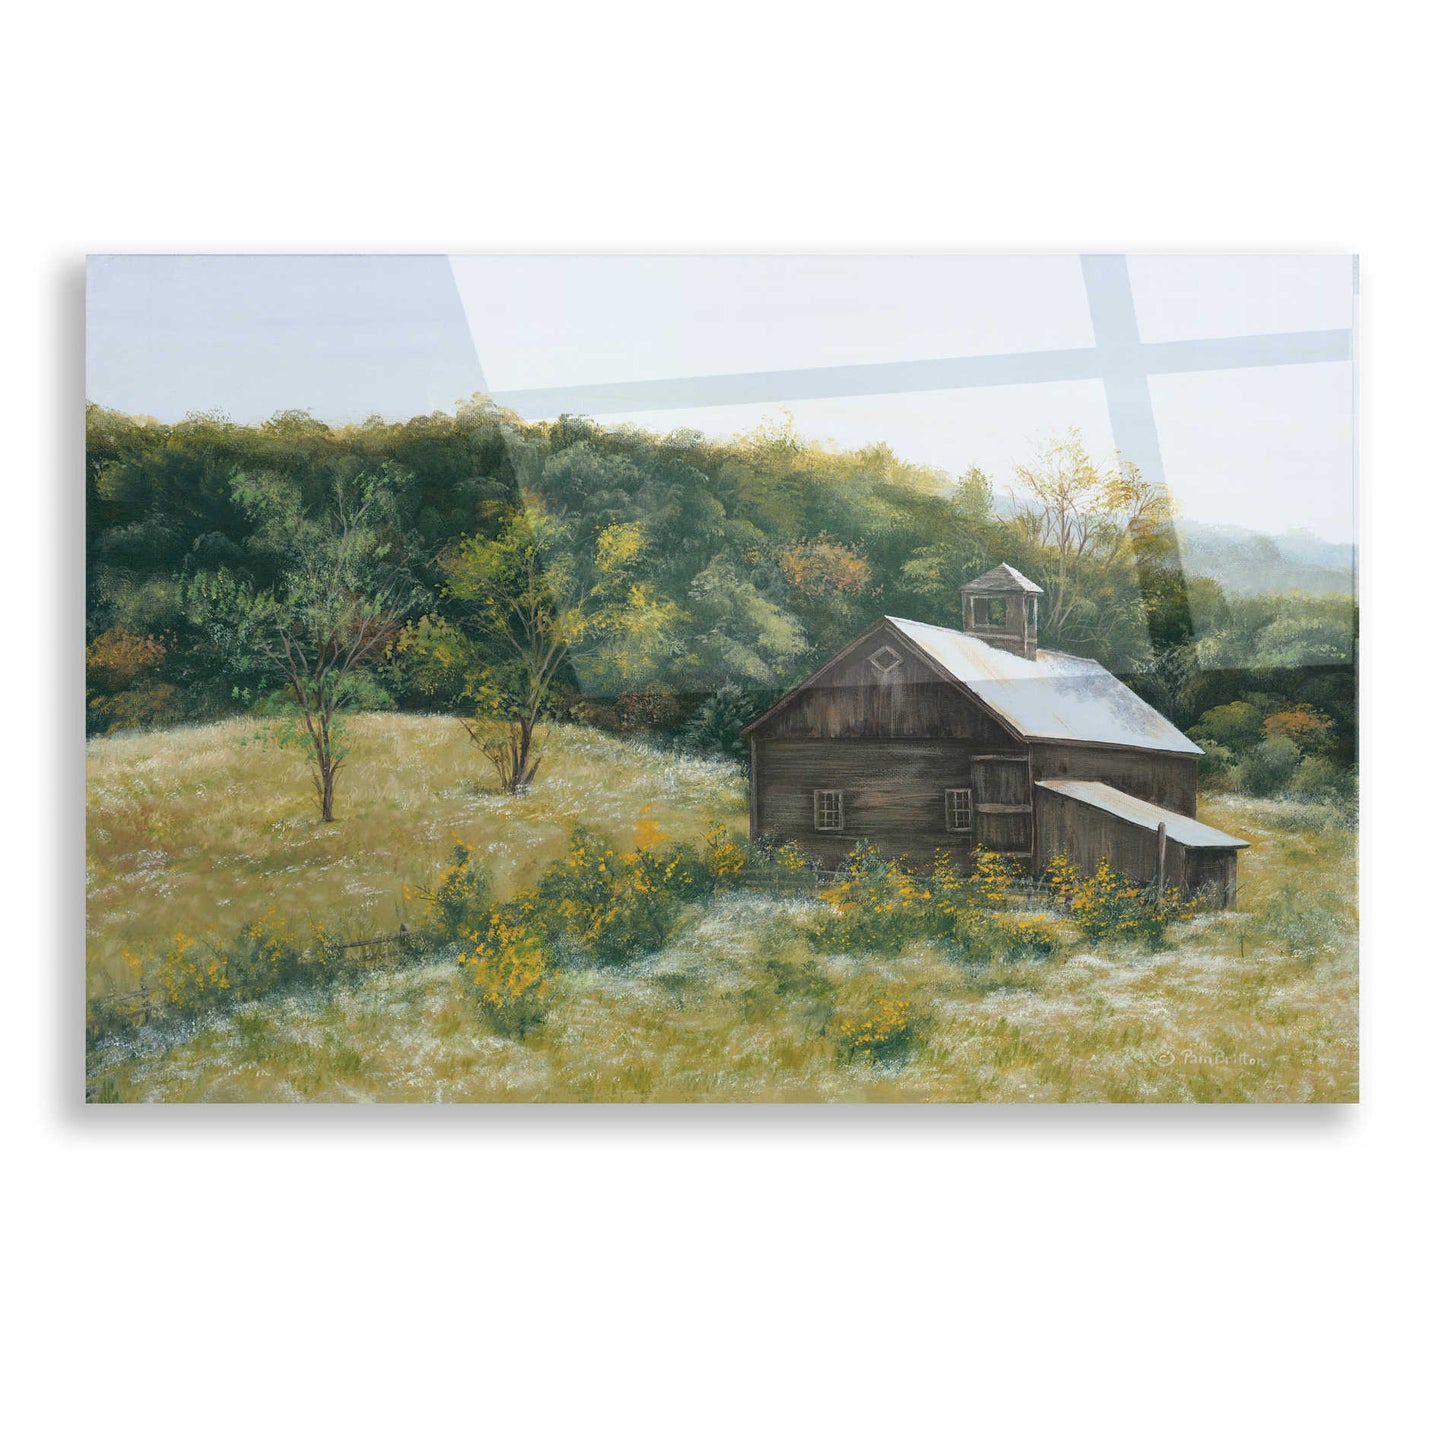 Epic Art 'Barn in Vermont' by Pam Britton, Acrylic Glass Wall Art,16x12